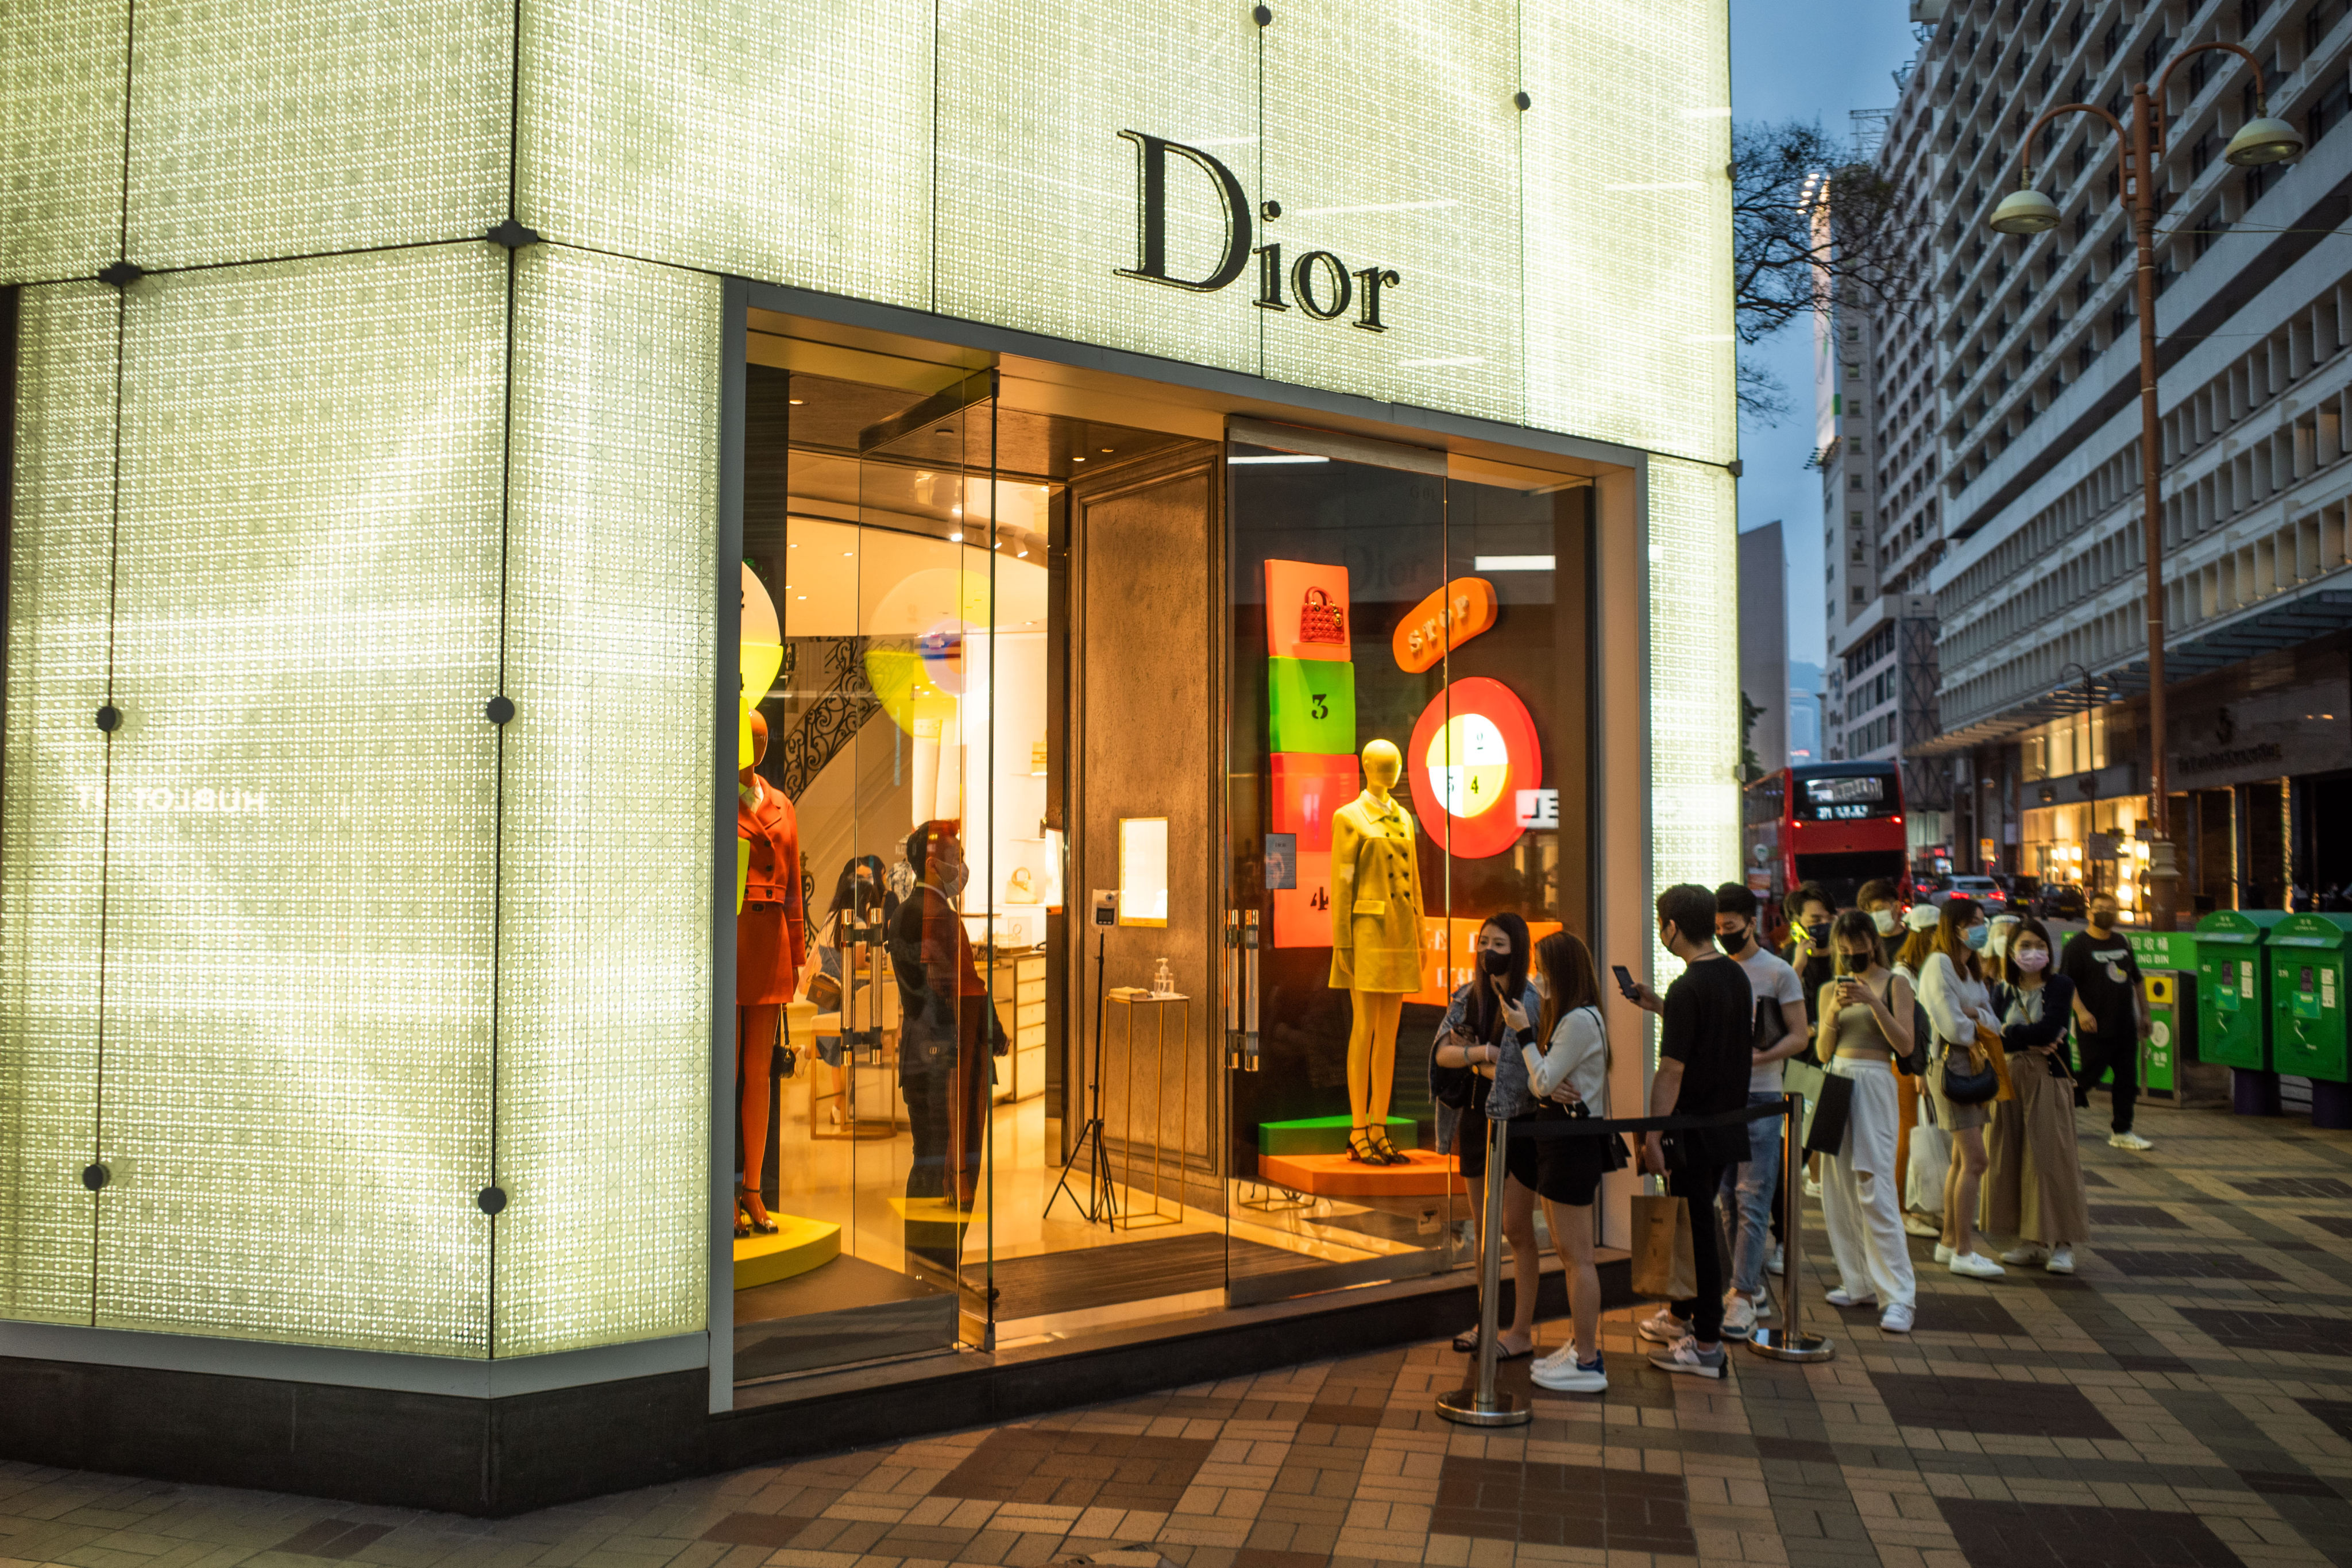 Why LVMH is moving out of Hong Kong to mainland China: instead of